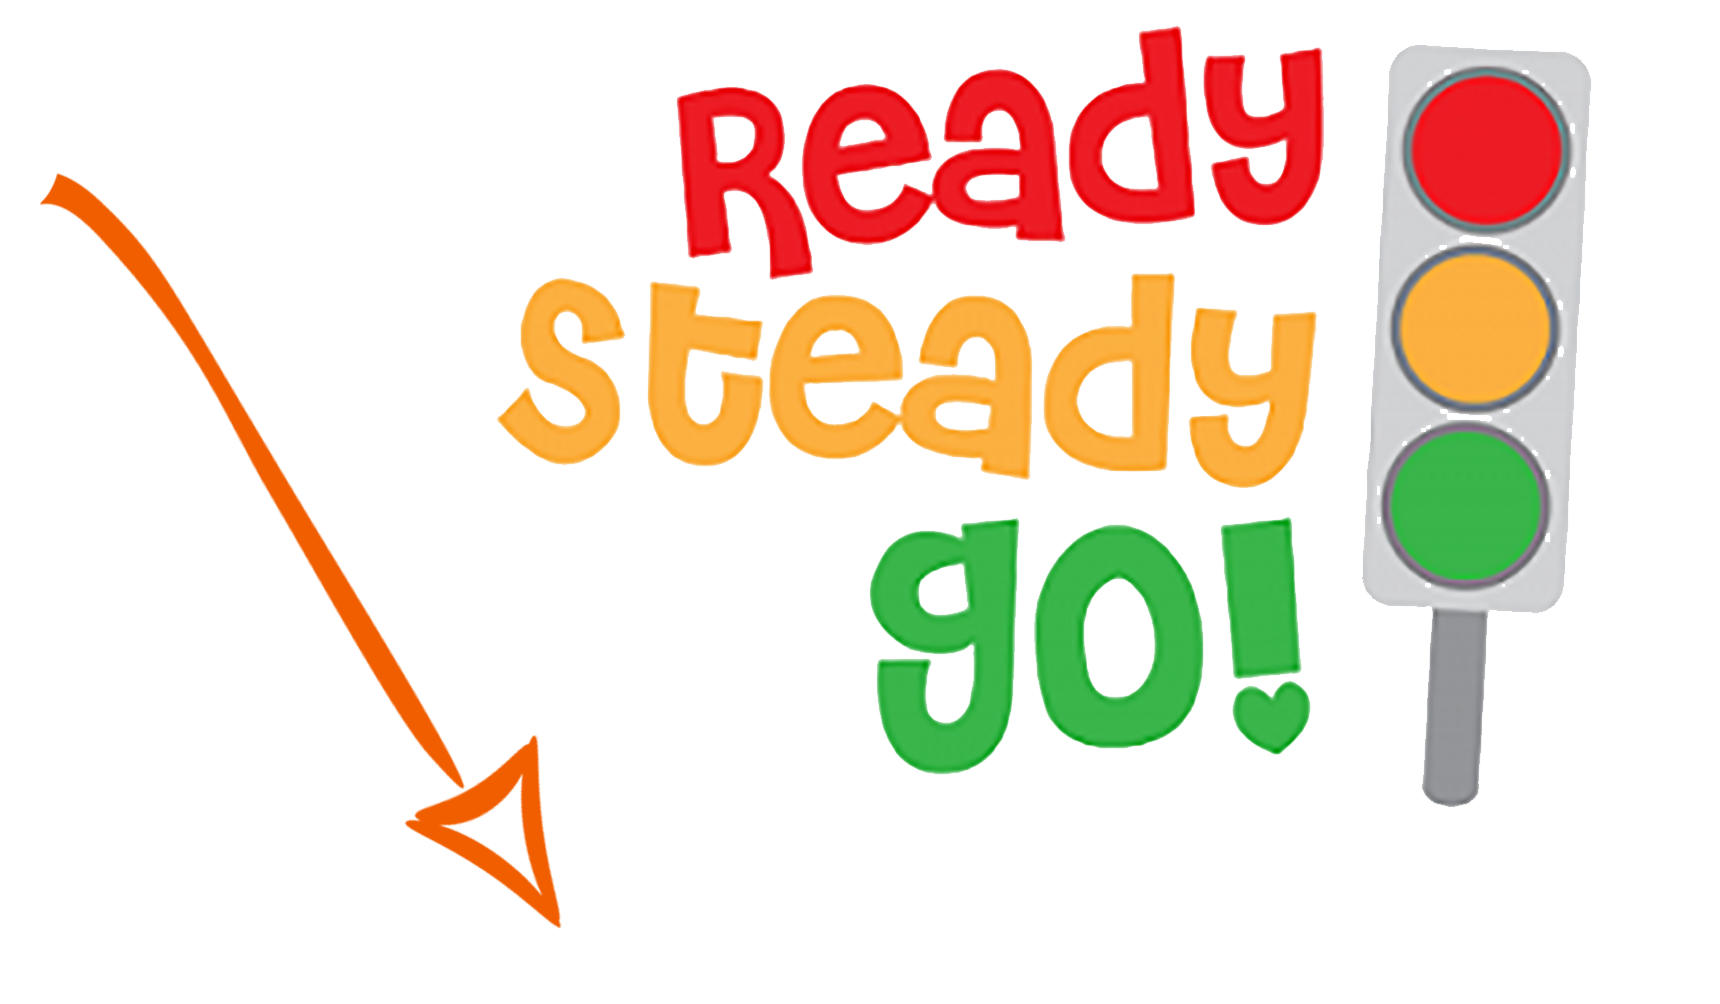 Get ready. Ready, steady, go!. Ready steady go картинки. Ready picture. See you ready